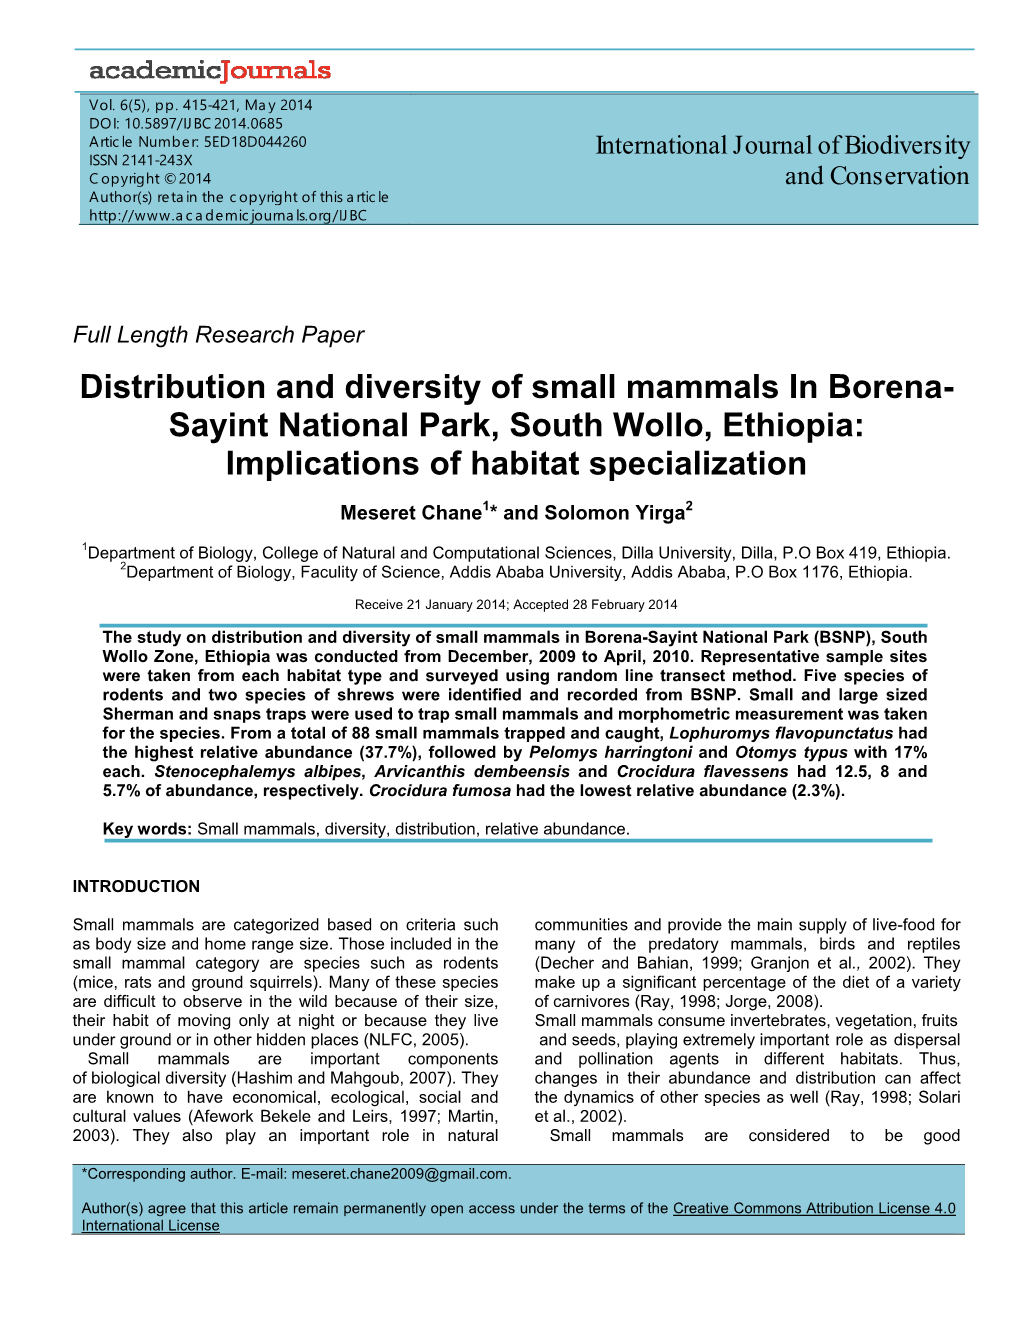 Distribution and Diversity of Small Mammals in Borena- Sayint National Park, South Wollo, Ethiopia: Implications of Habitat Specialization